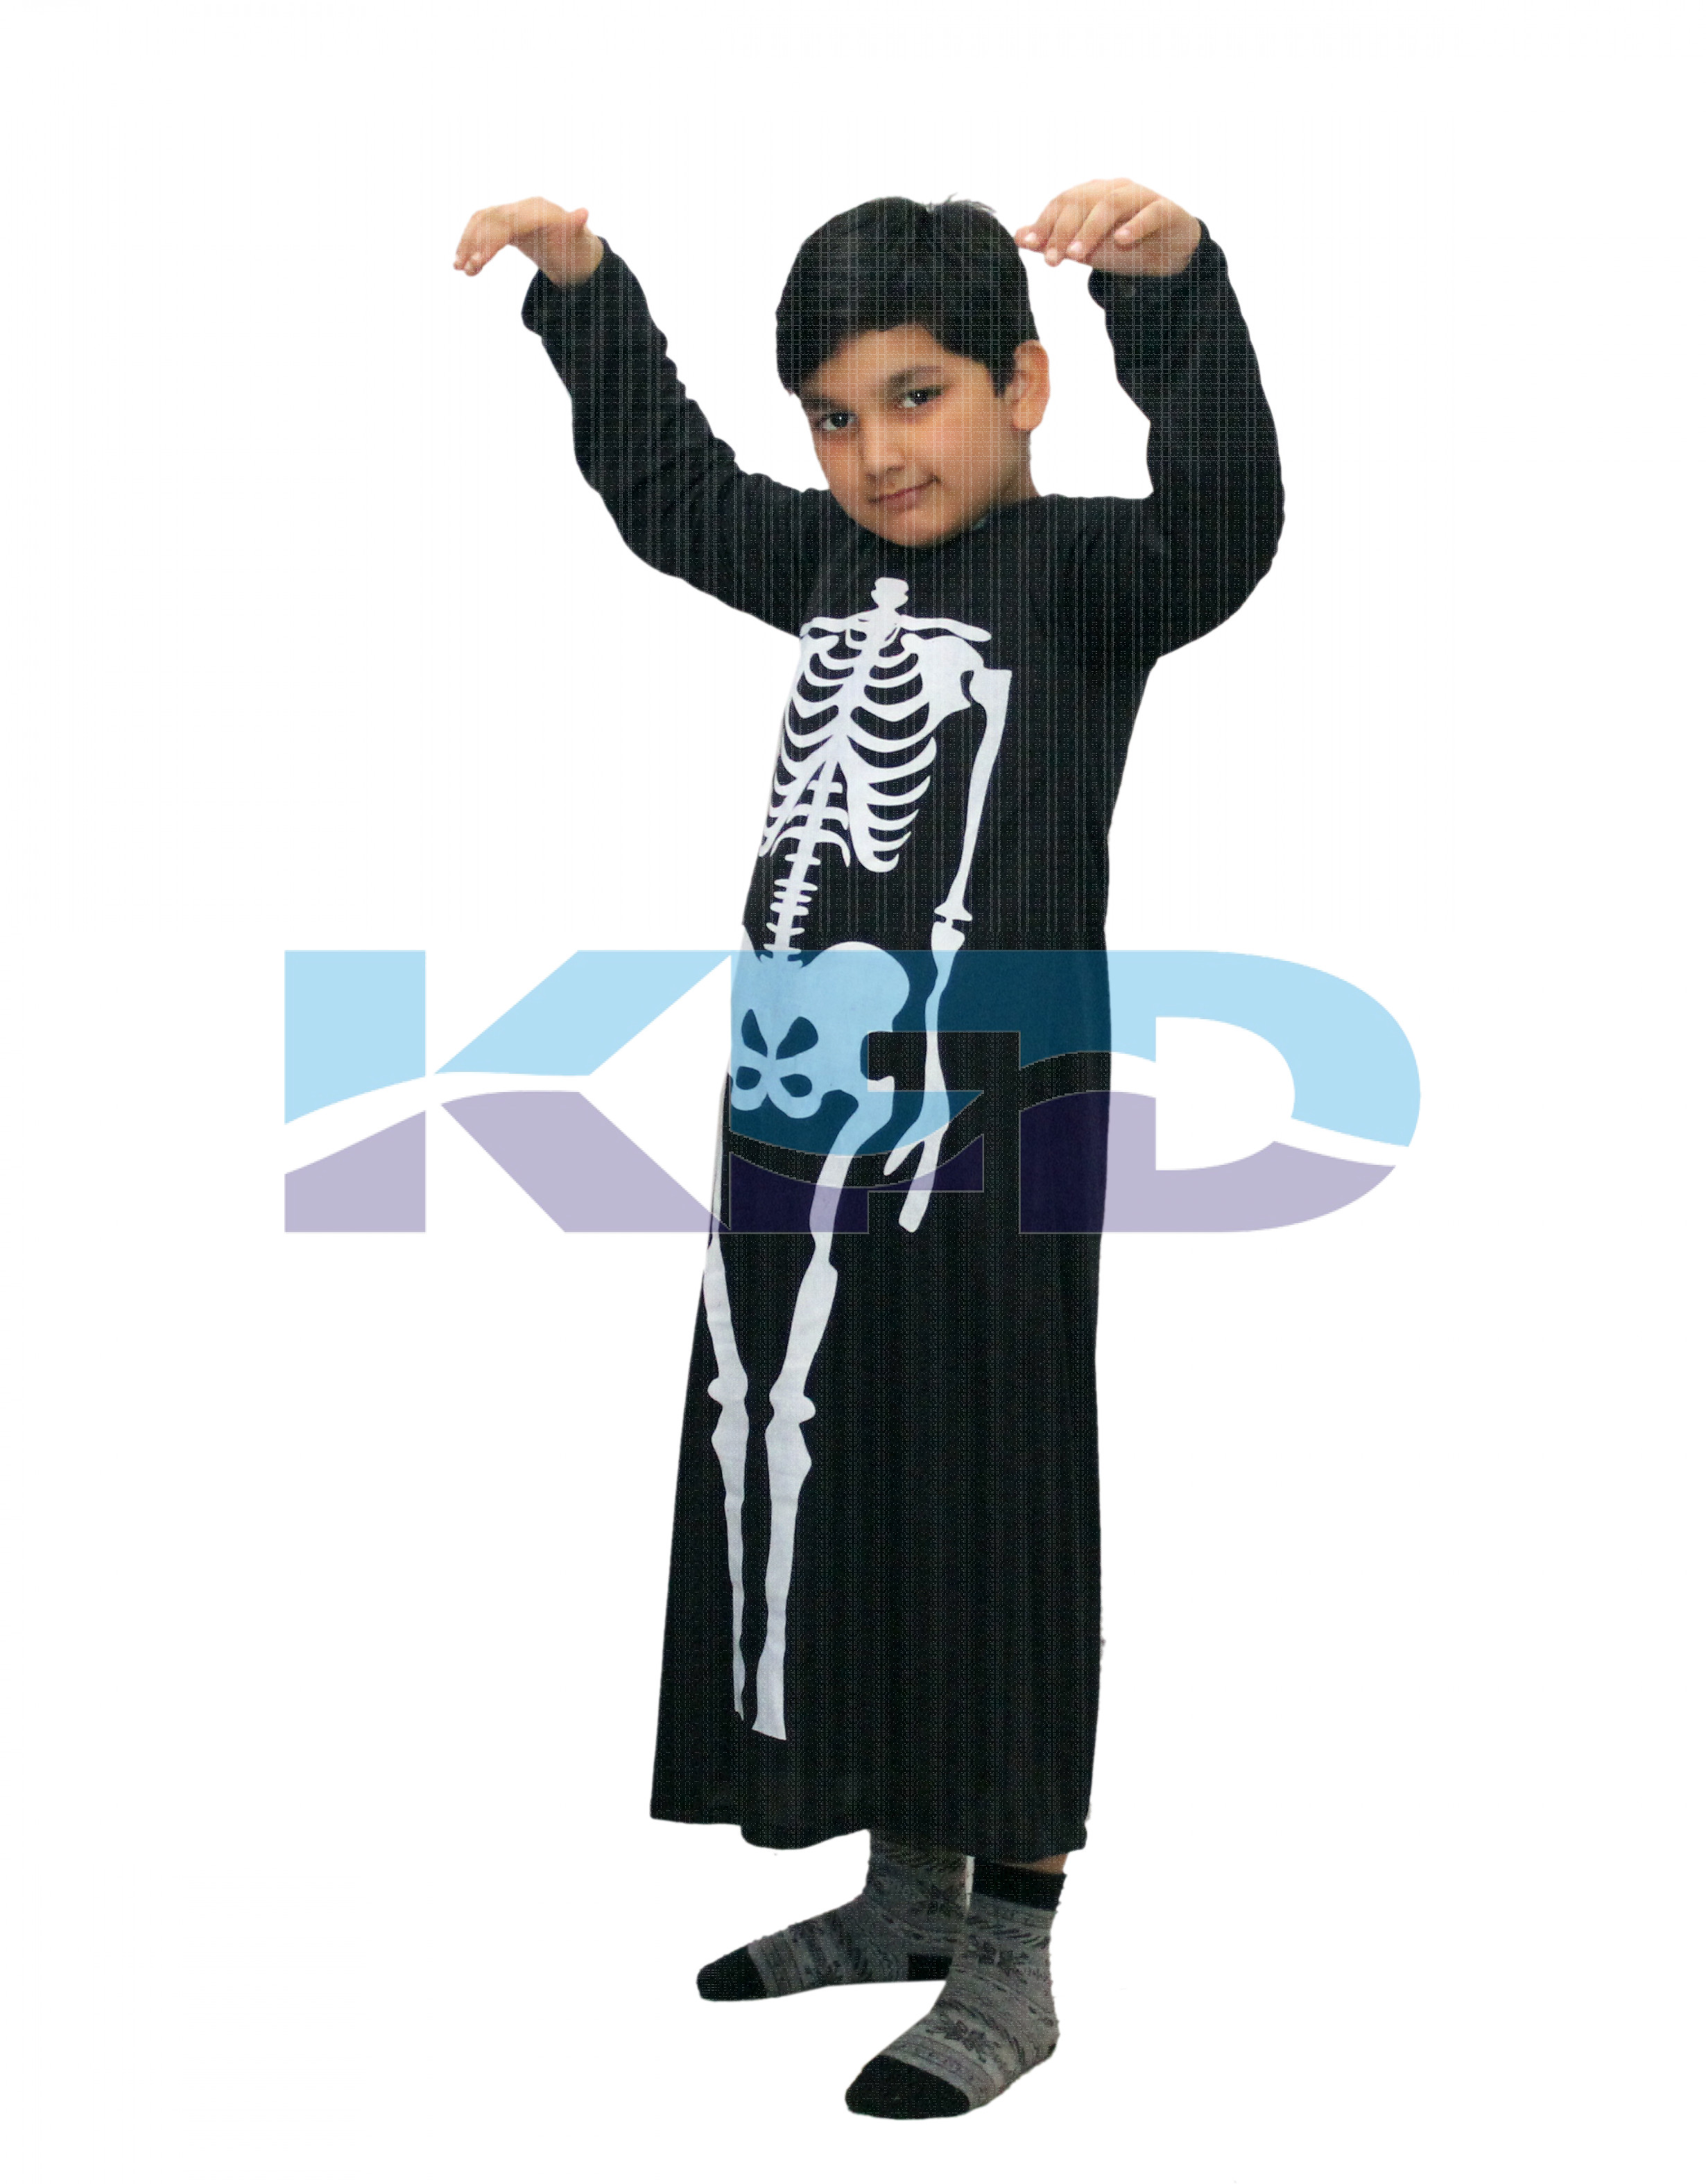  Skeleton Dracula Gown Halloween Costume/California Costume For School Annual function/Theme Party/Competition/Stage Shows/Birthday Party Dress